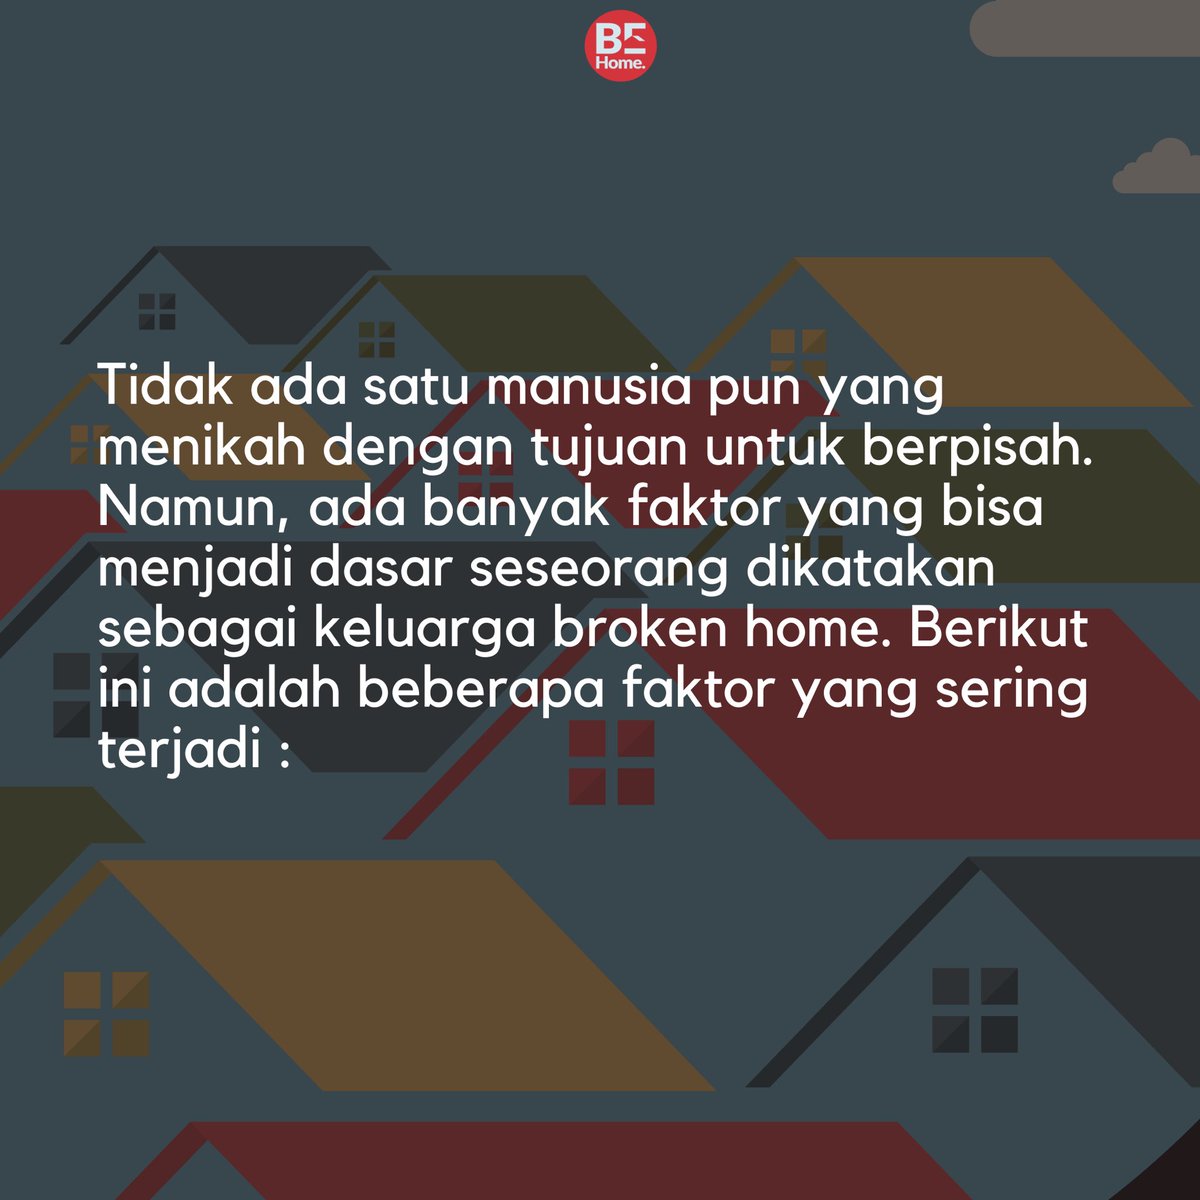 behome_id tweet picture